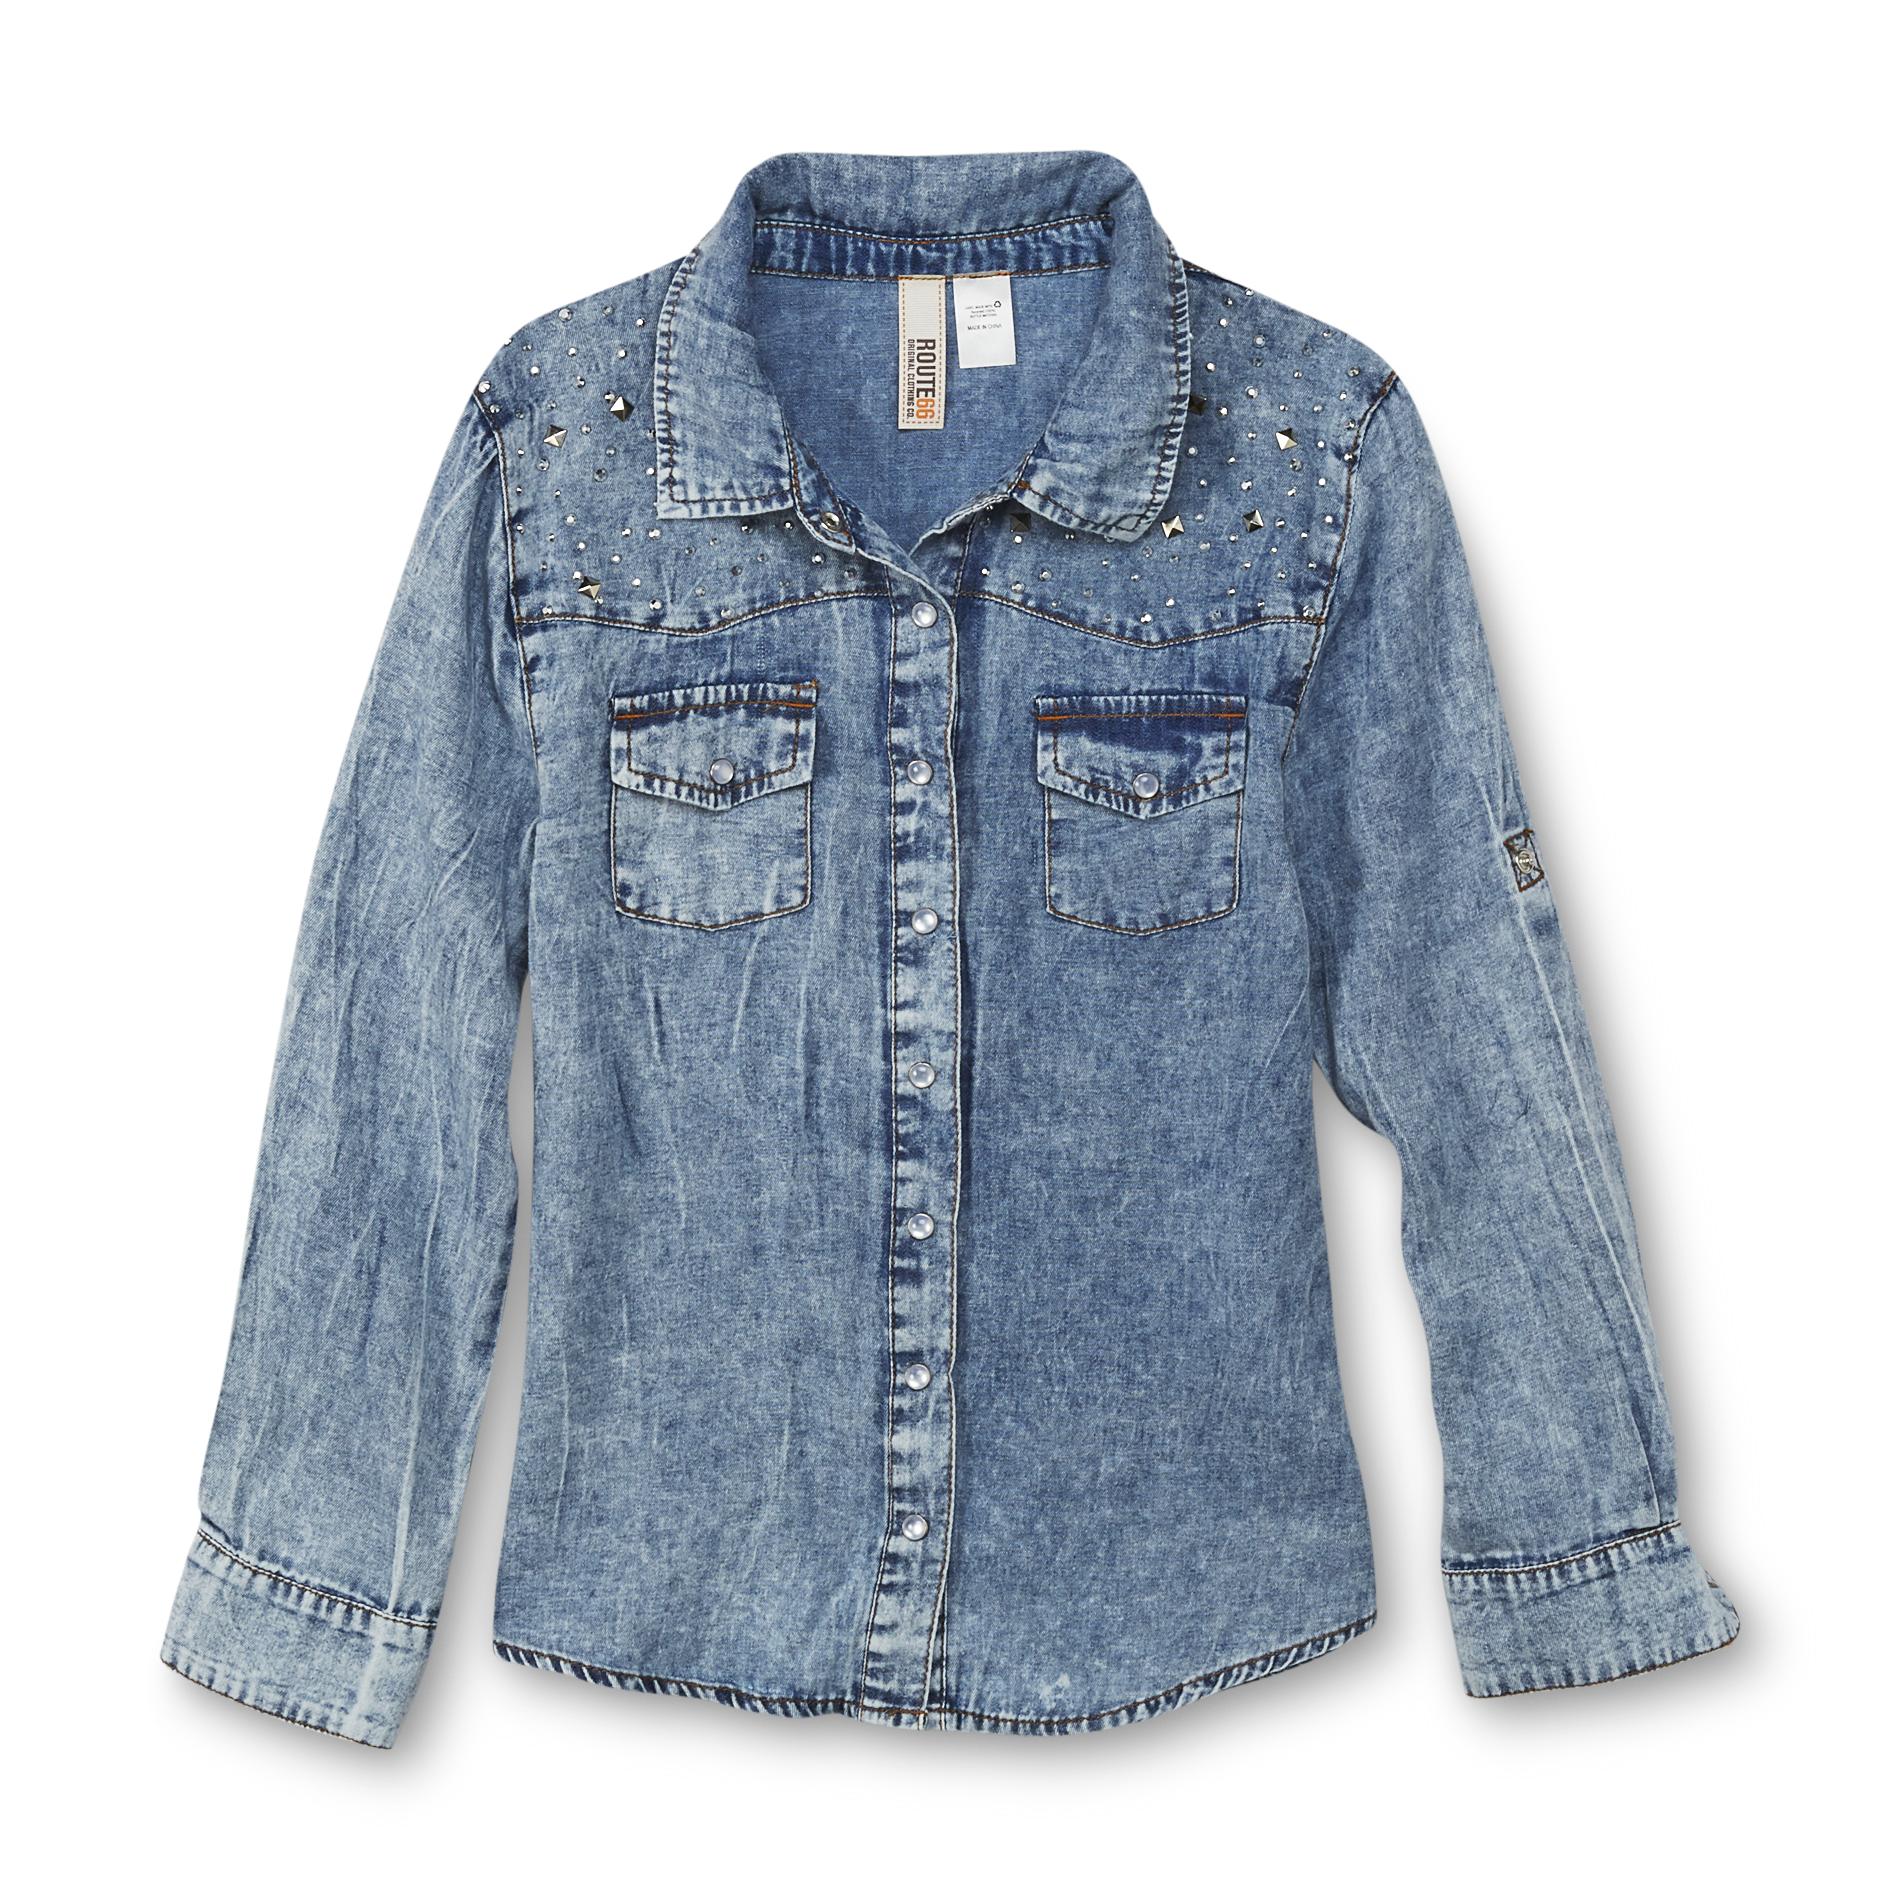 Route 66 Girl's Studded Chambray Shirt